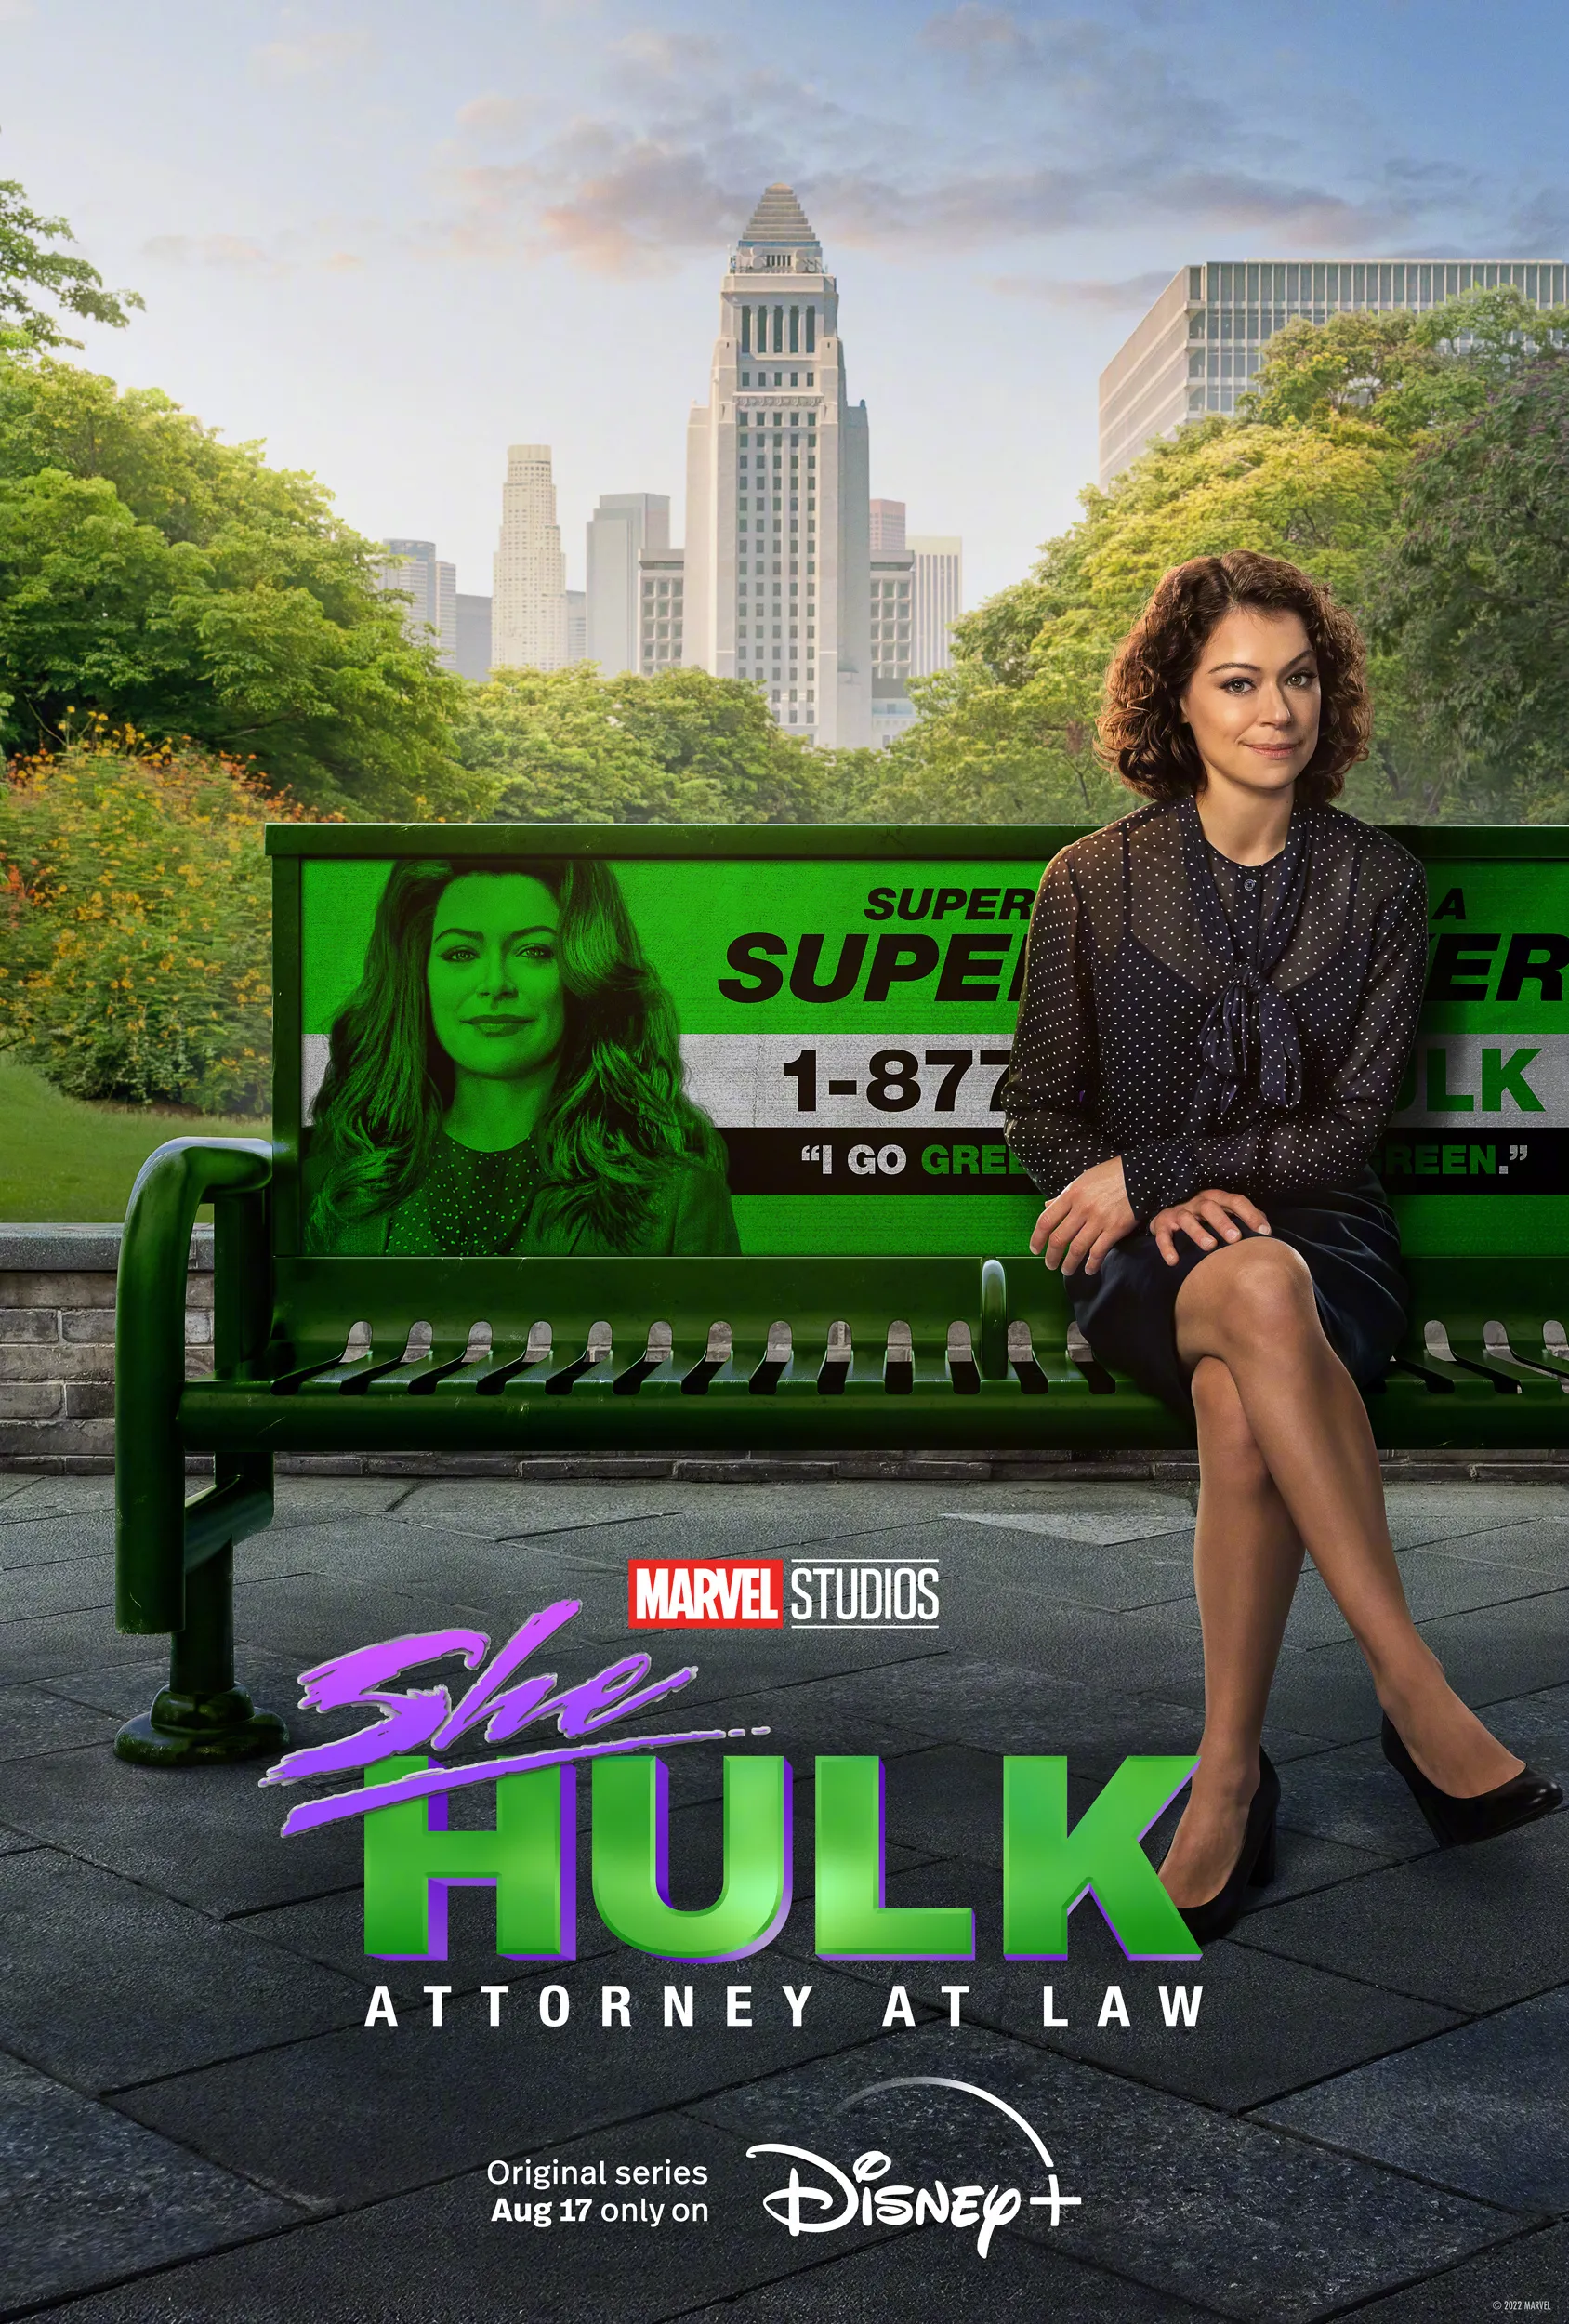 Marvel's "She-Hulk" reveals new trailers and posters, Daredevil surprise cameo | FMV6